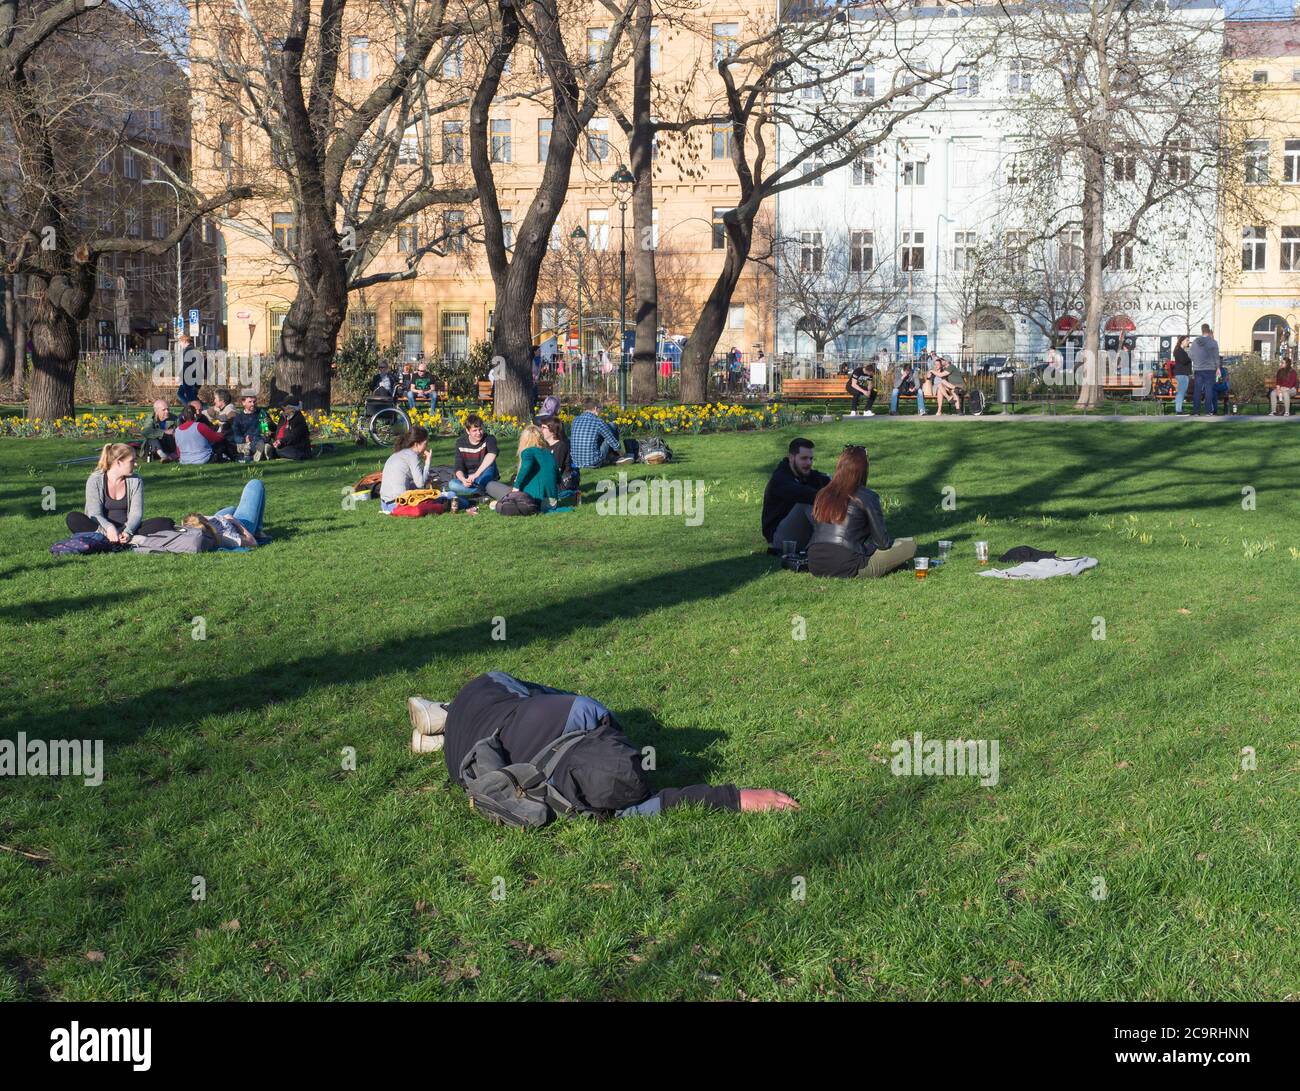 Czech Republic, Prague, April 10, 2018: sleeping man and group of people relaxing on lush green grass and enjoying early spring day on Karlinske Stock Photo